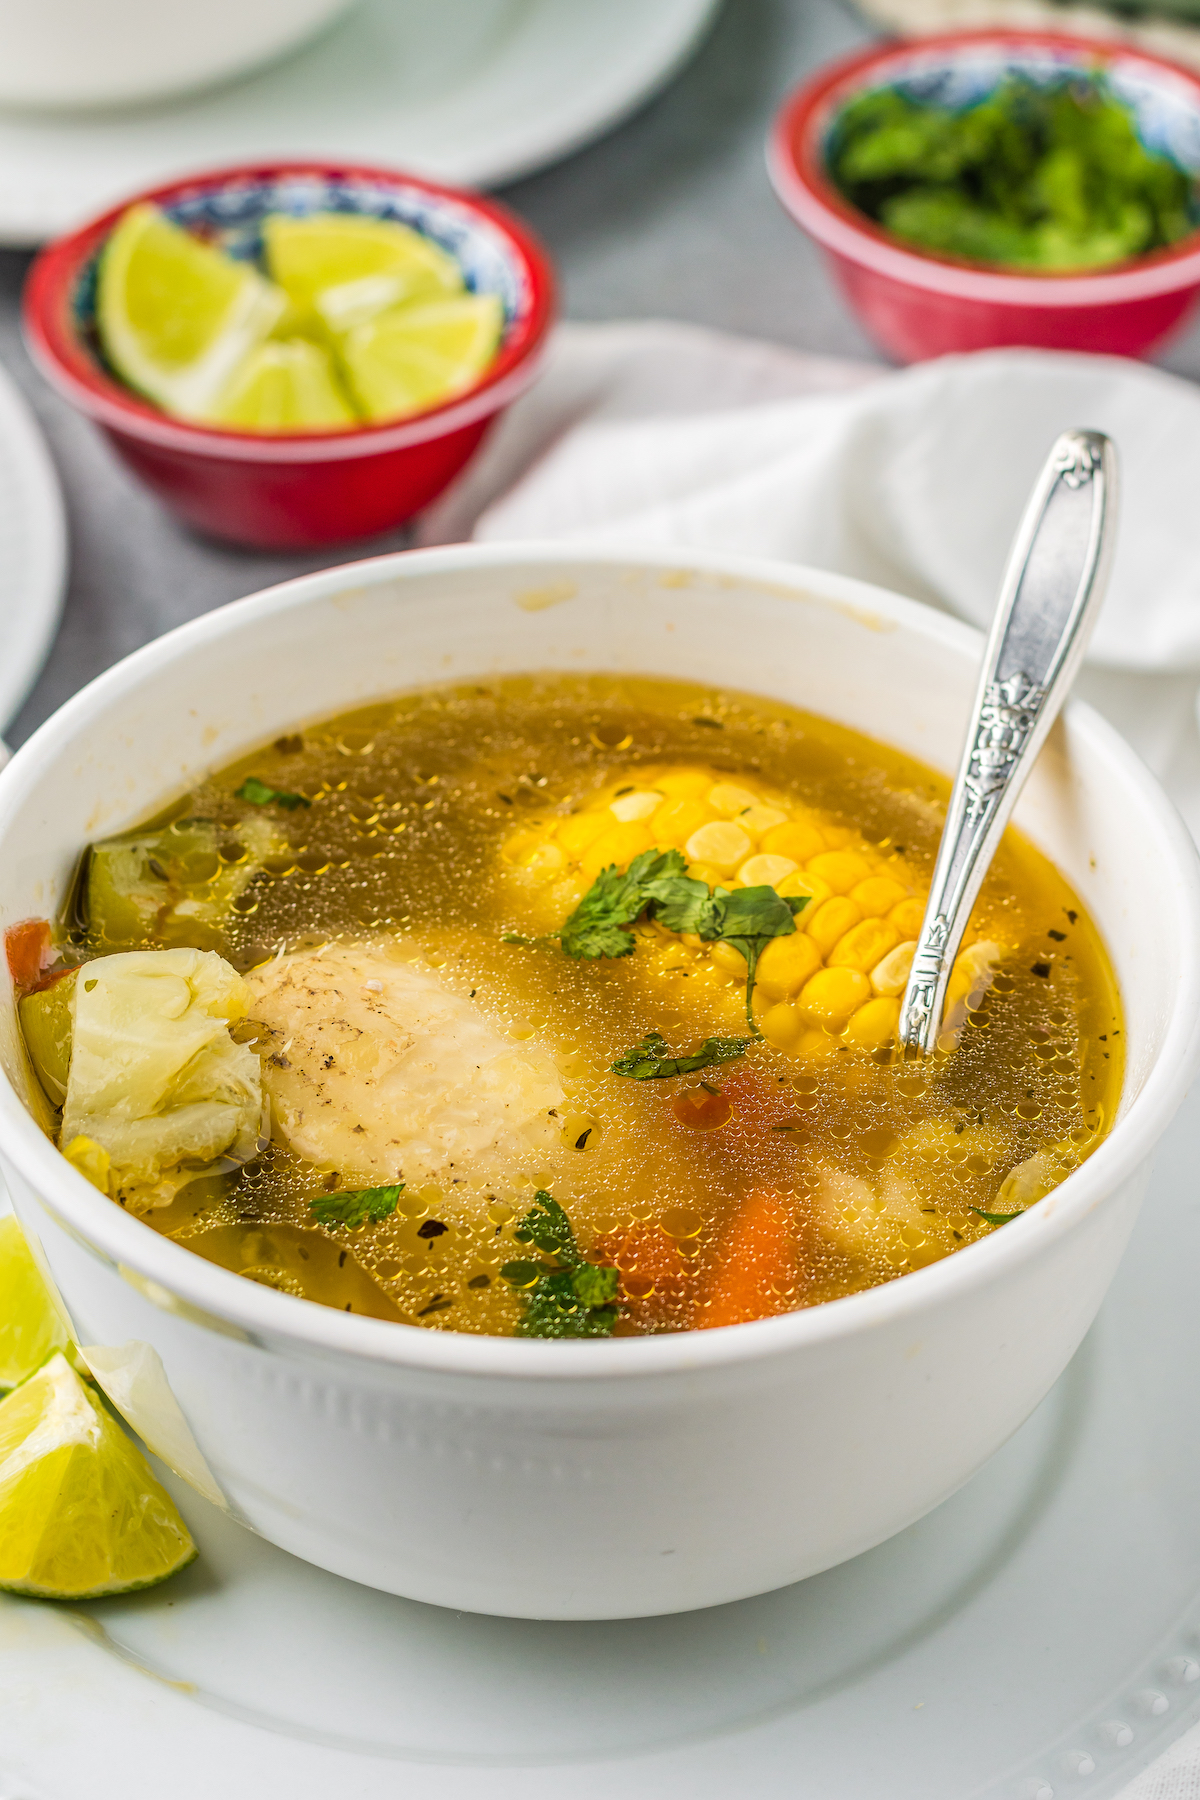 a bowl of Mexican soup with a chicken leg, corn, and other vegetables in a rich broth